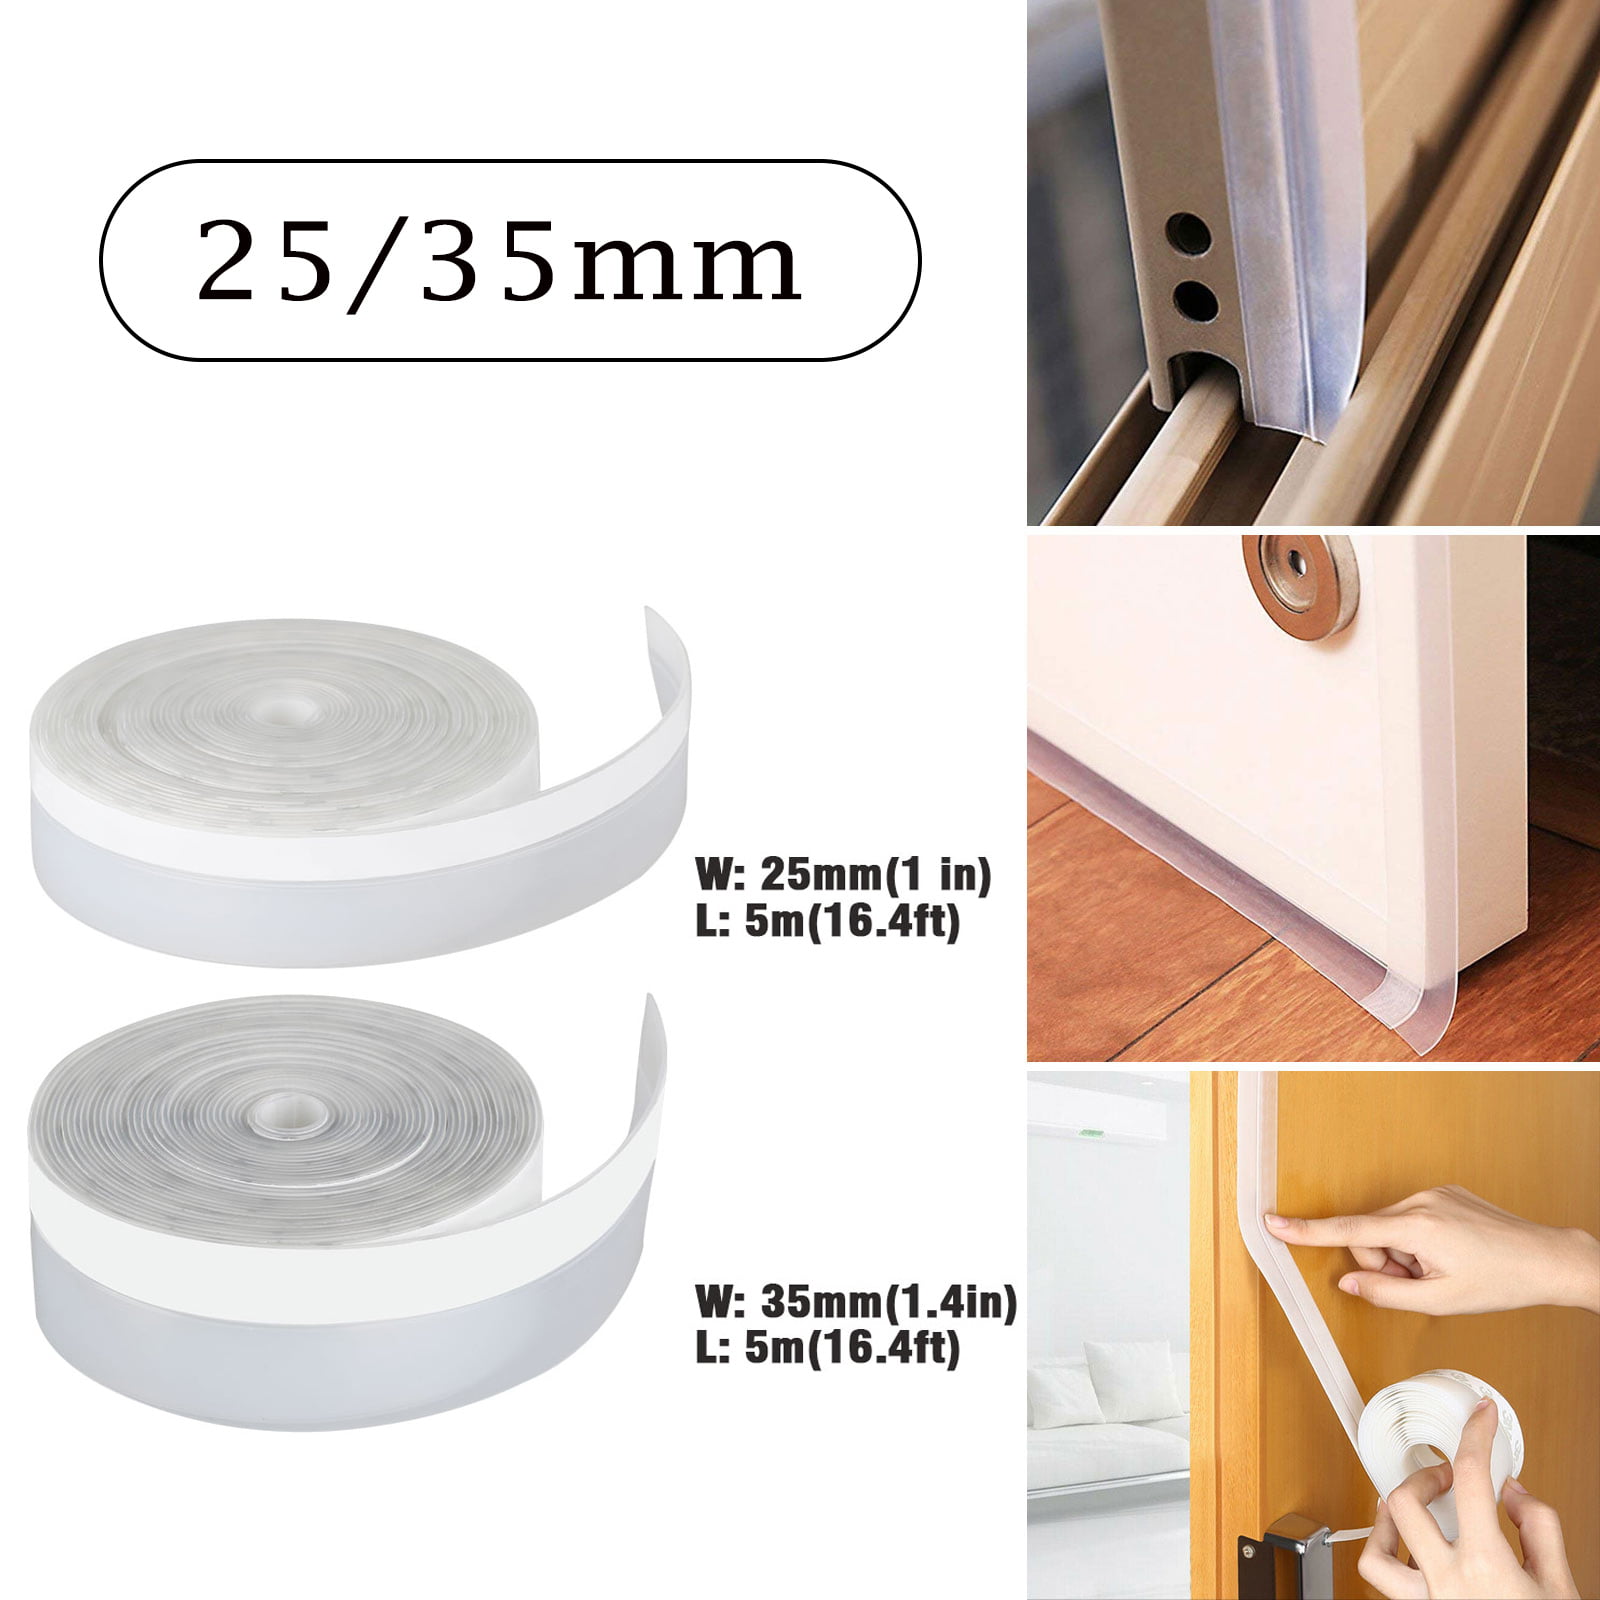 45MM,Transparent Silicone Seal Strip,10M/32.8 ft Door Strip Bottom for Doors Silicone Sealing Sticker Adhesive for Doors and Windows House and Glass Shower Door Seal Strip for Side of Door 